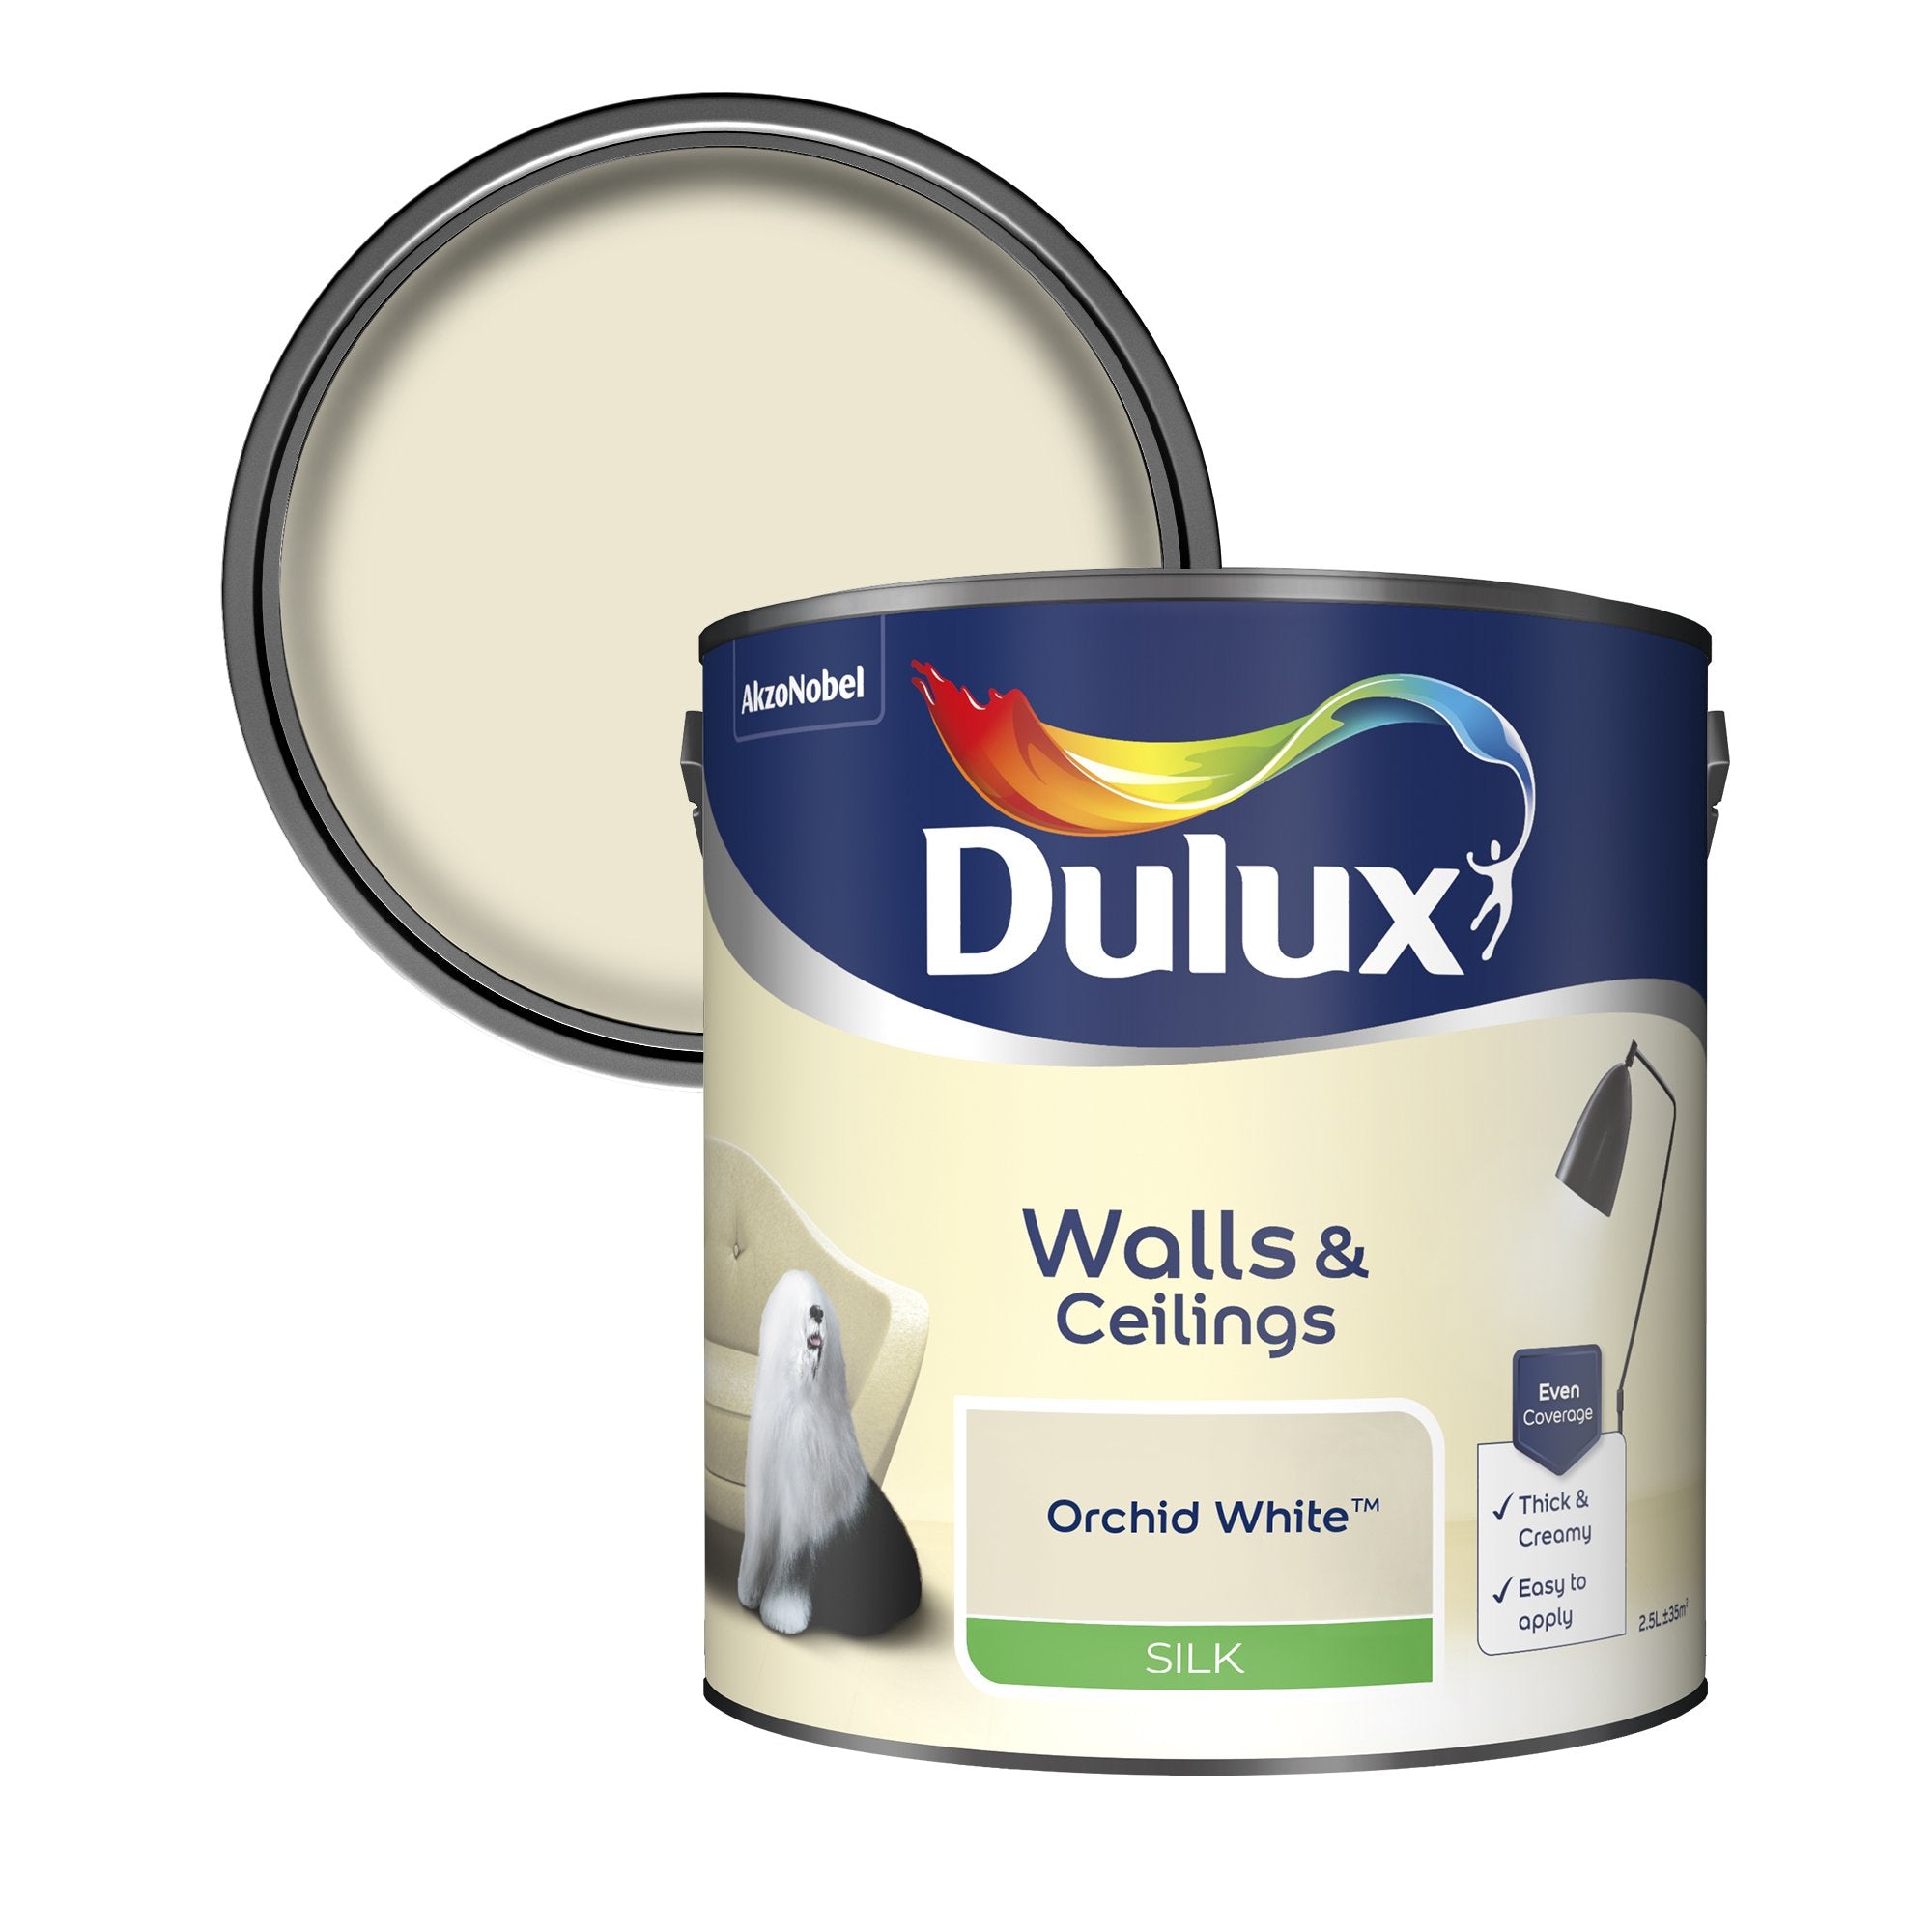 Dulux-Silk-Emulsion-Paint-For-Walls-And-Ceilings-Orchid-White-2.5L